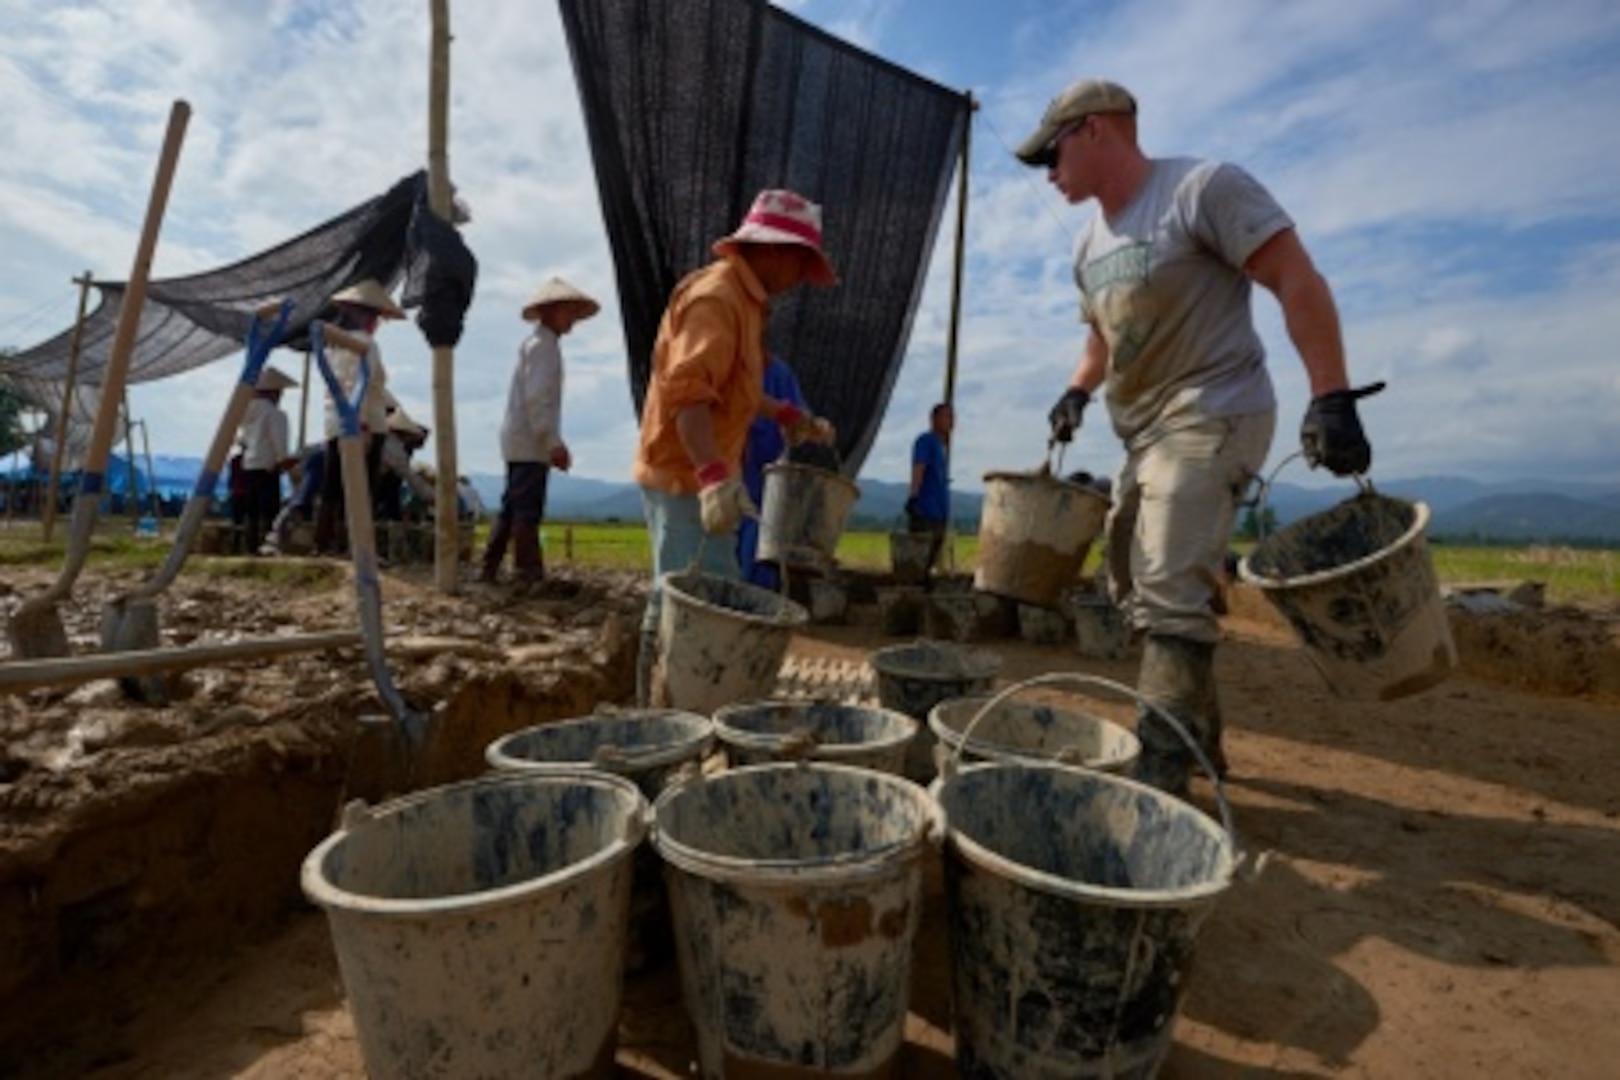 U.S. Marine Sgt. Daniel Sutfin, Defense PIOW/MIA Accounting Agency (DPAA) augmentee, moves buckets with local workers at an excavation site in Dien Bien province, Vietnam, Nov. 23, 2015. Sutfin, a military policeman deployed from Camp Hansen, Okinawa, Japan, is part of a DPAA recovery team searching for two crew members lost in an F-4C aircraft crash during the Vietnam War. The DPAA mission is to provide the fullest possible accounting for our missing personnel to their families and the nation. (DoD photo by Staff Sgt. Kathrine Dodd, USAF/RELEASED)
